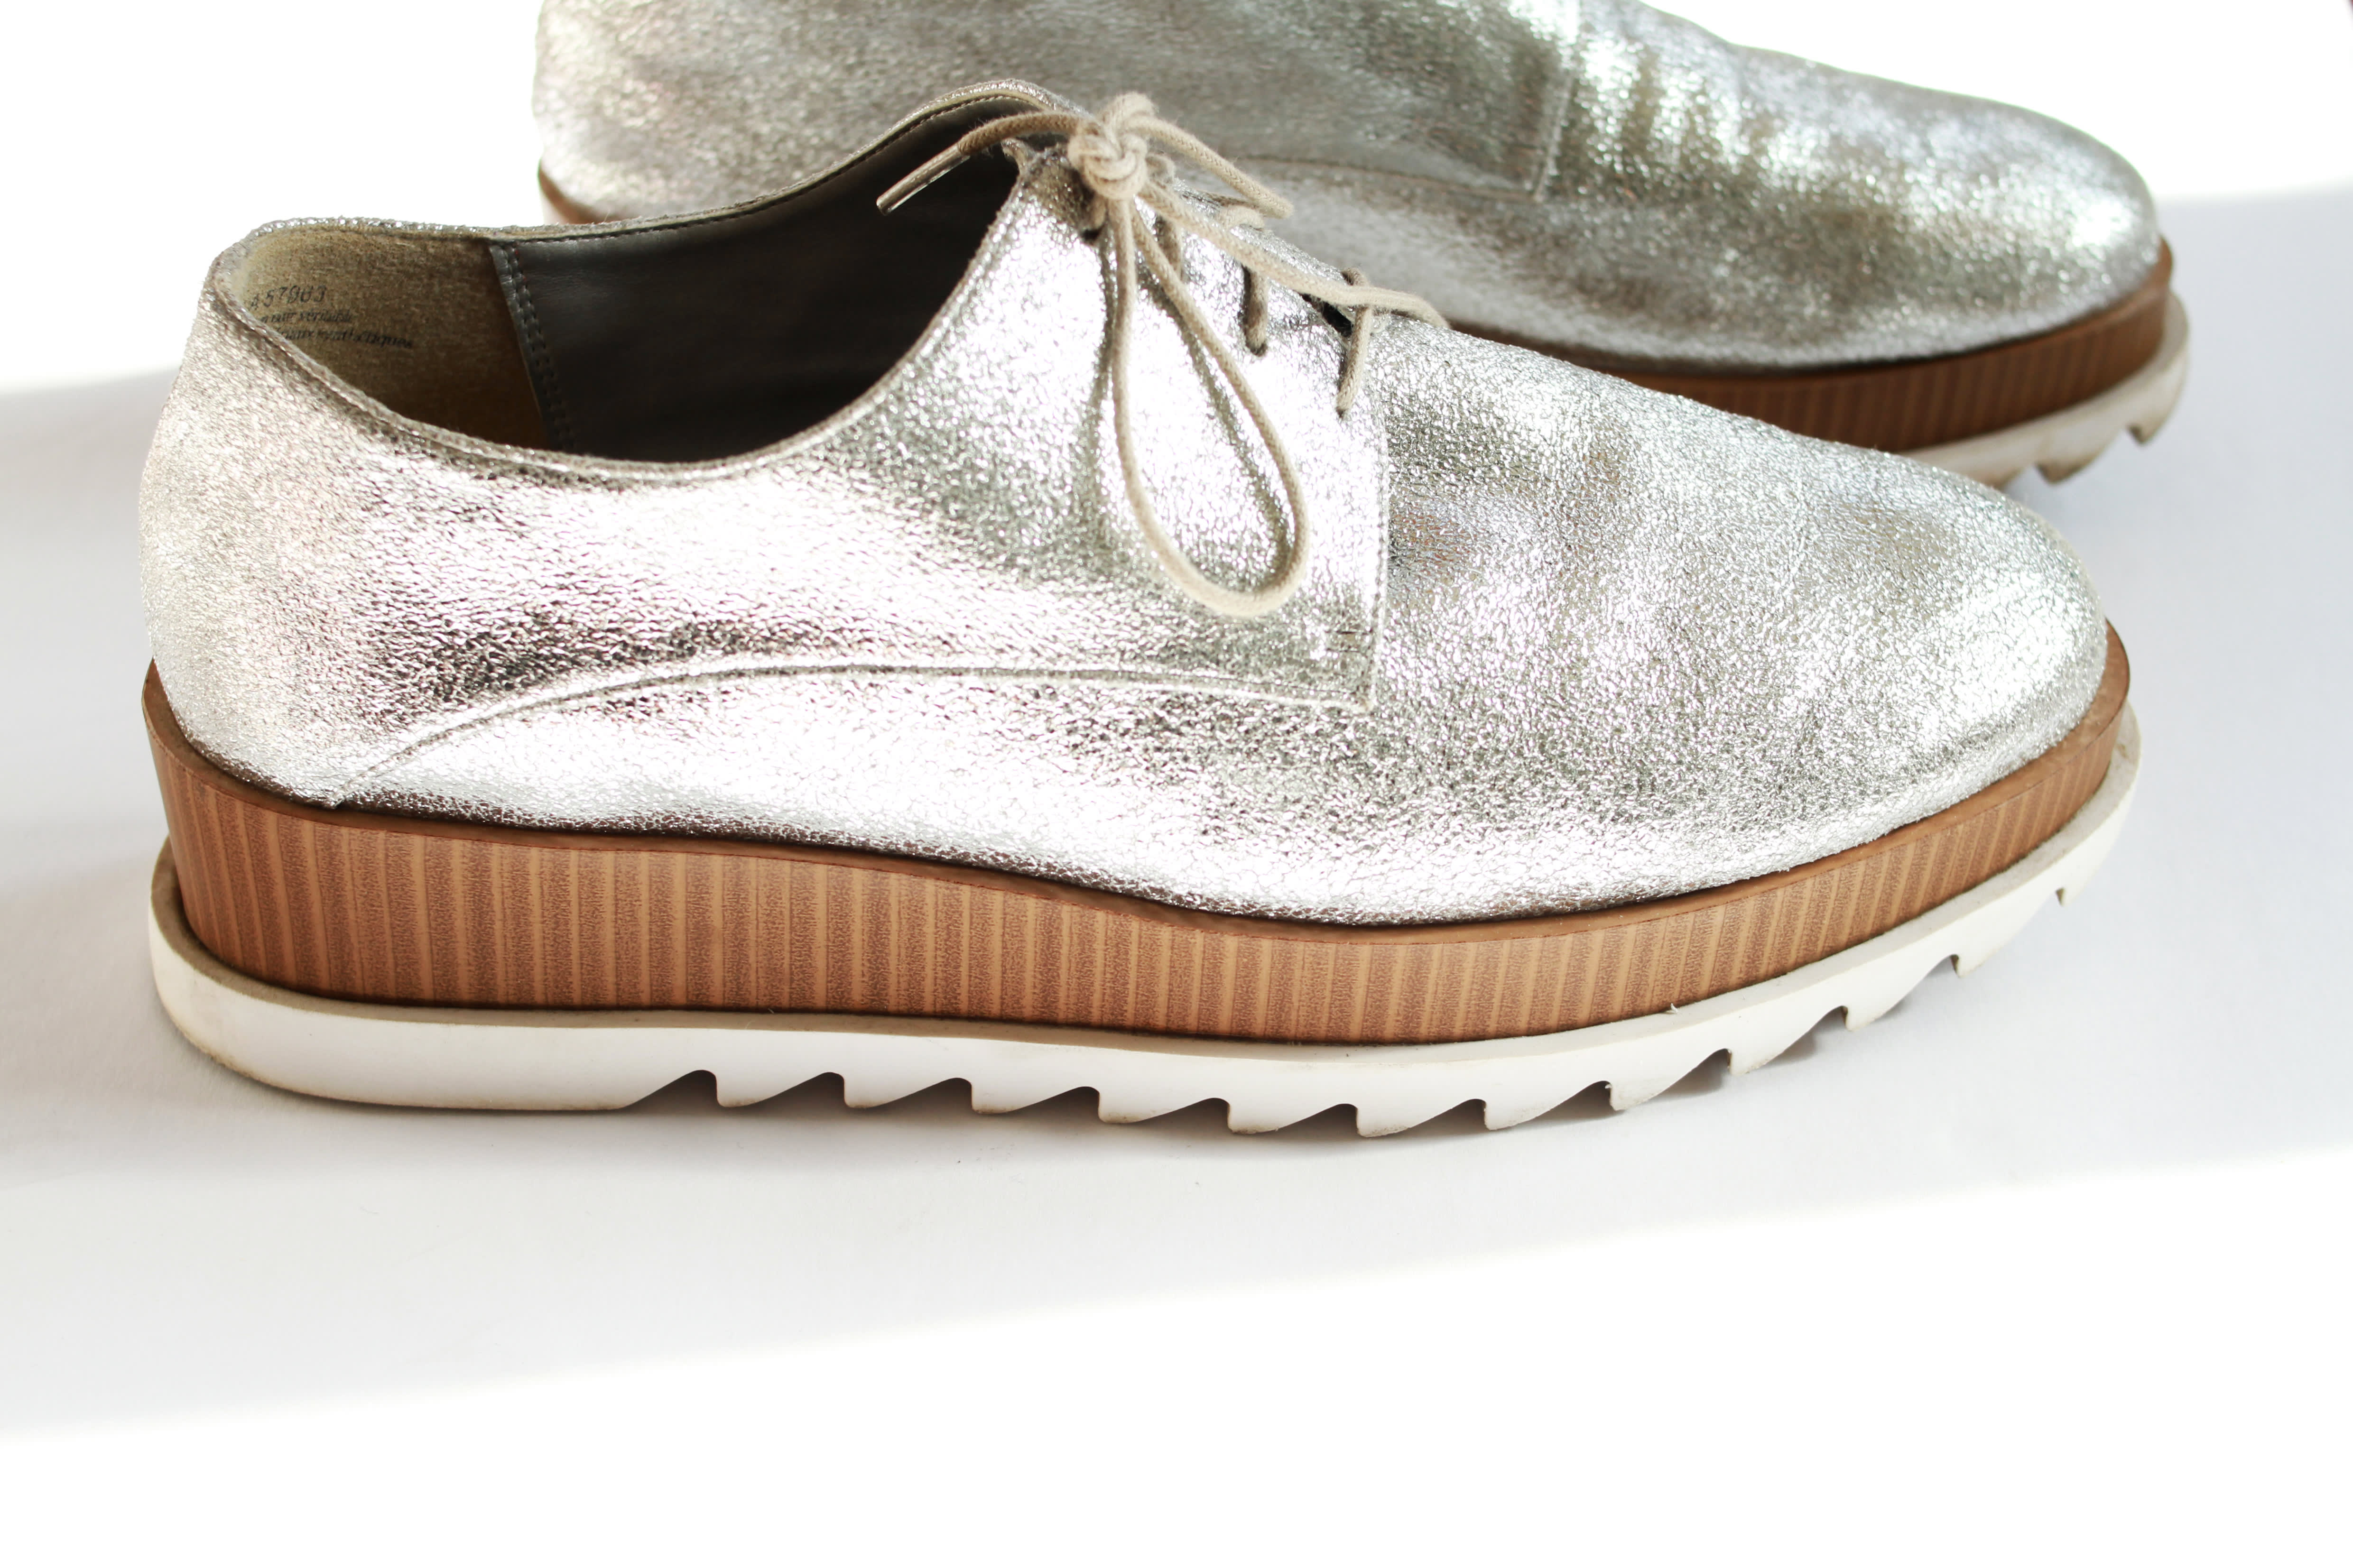 6 hacks to make your white shoes look new again